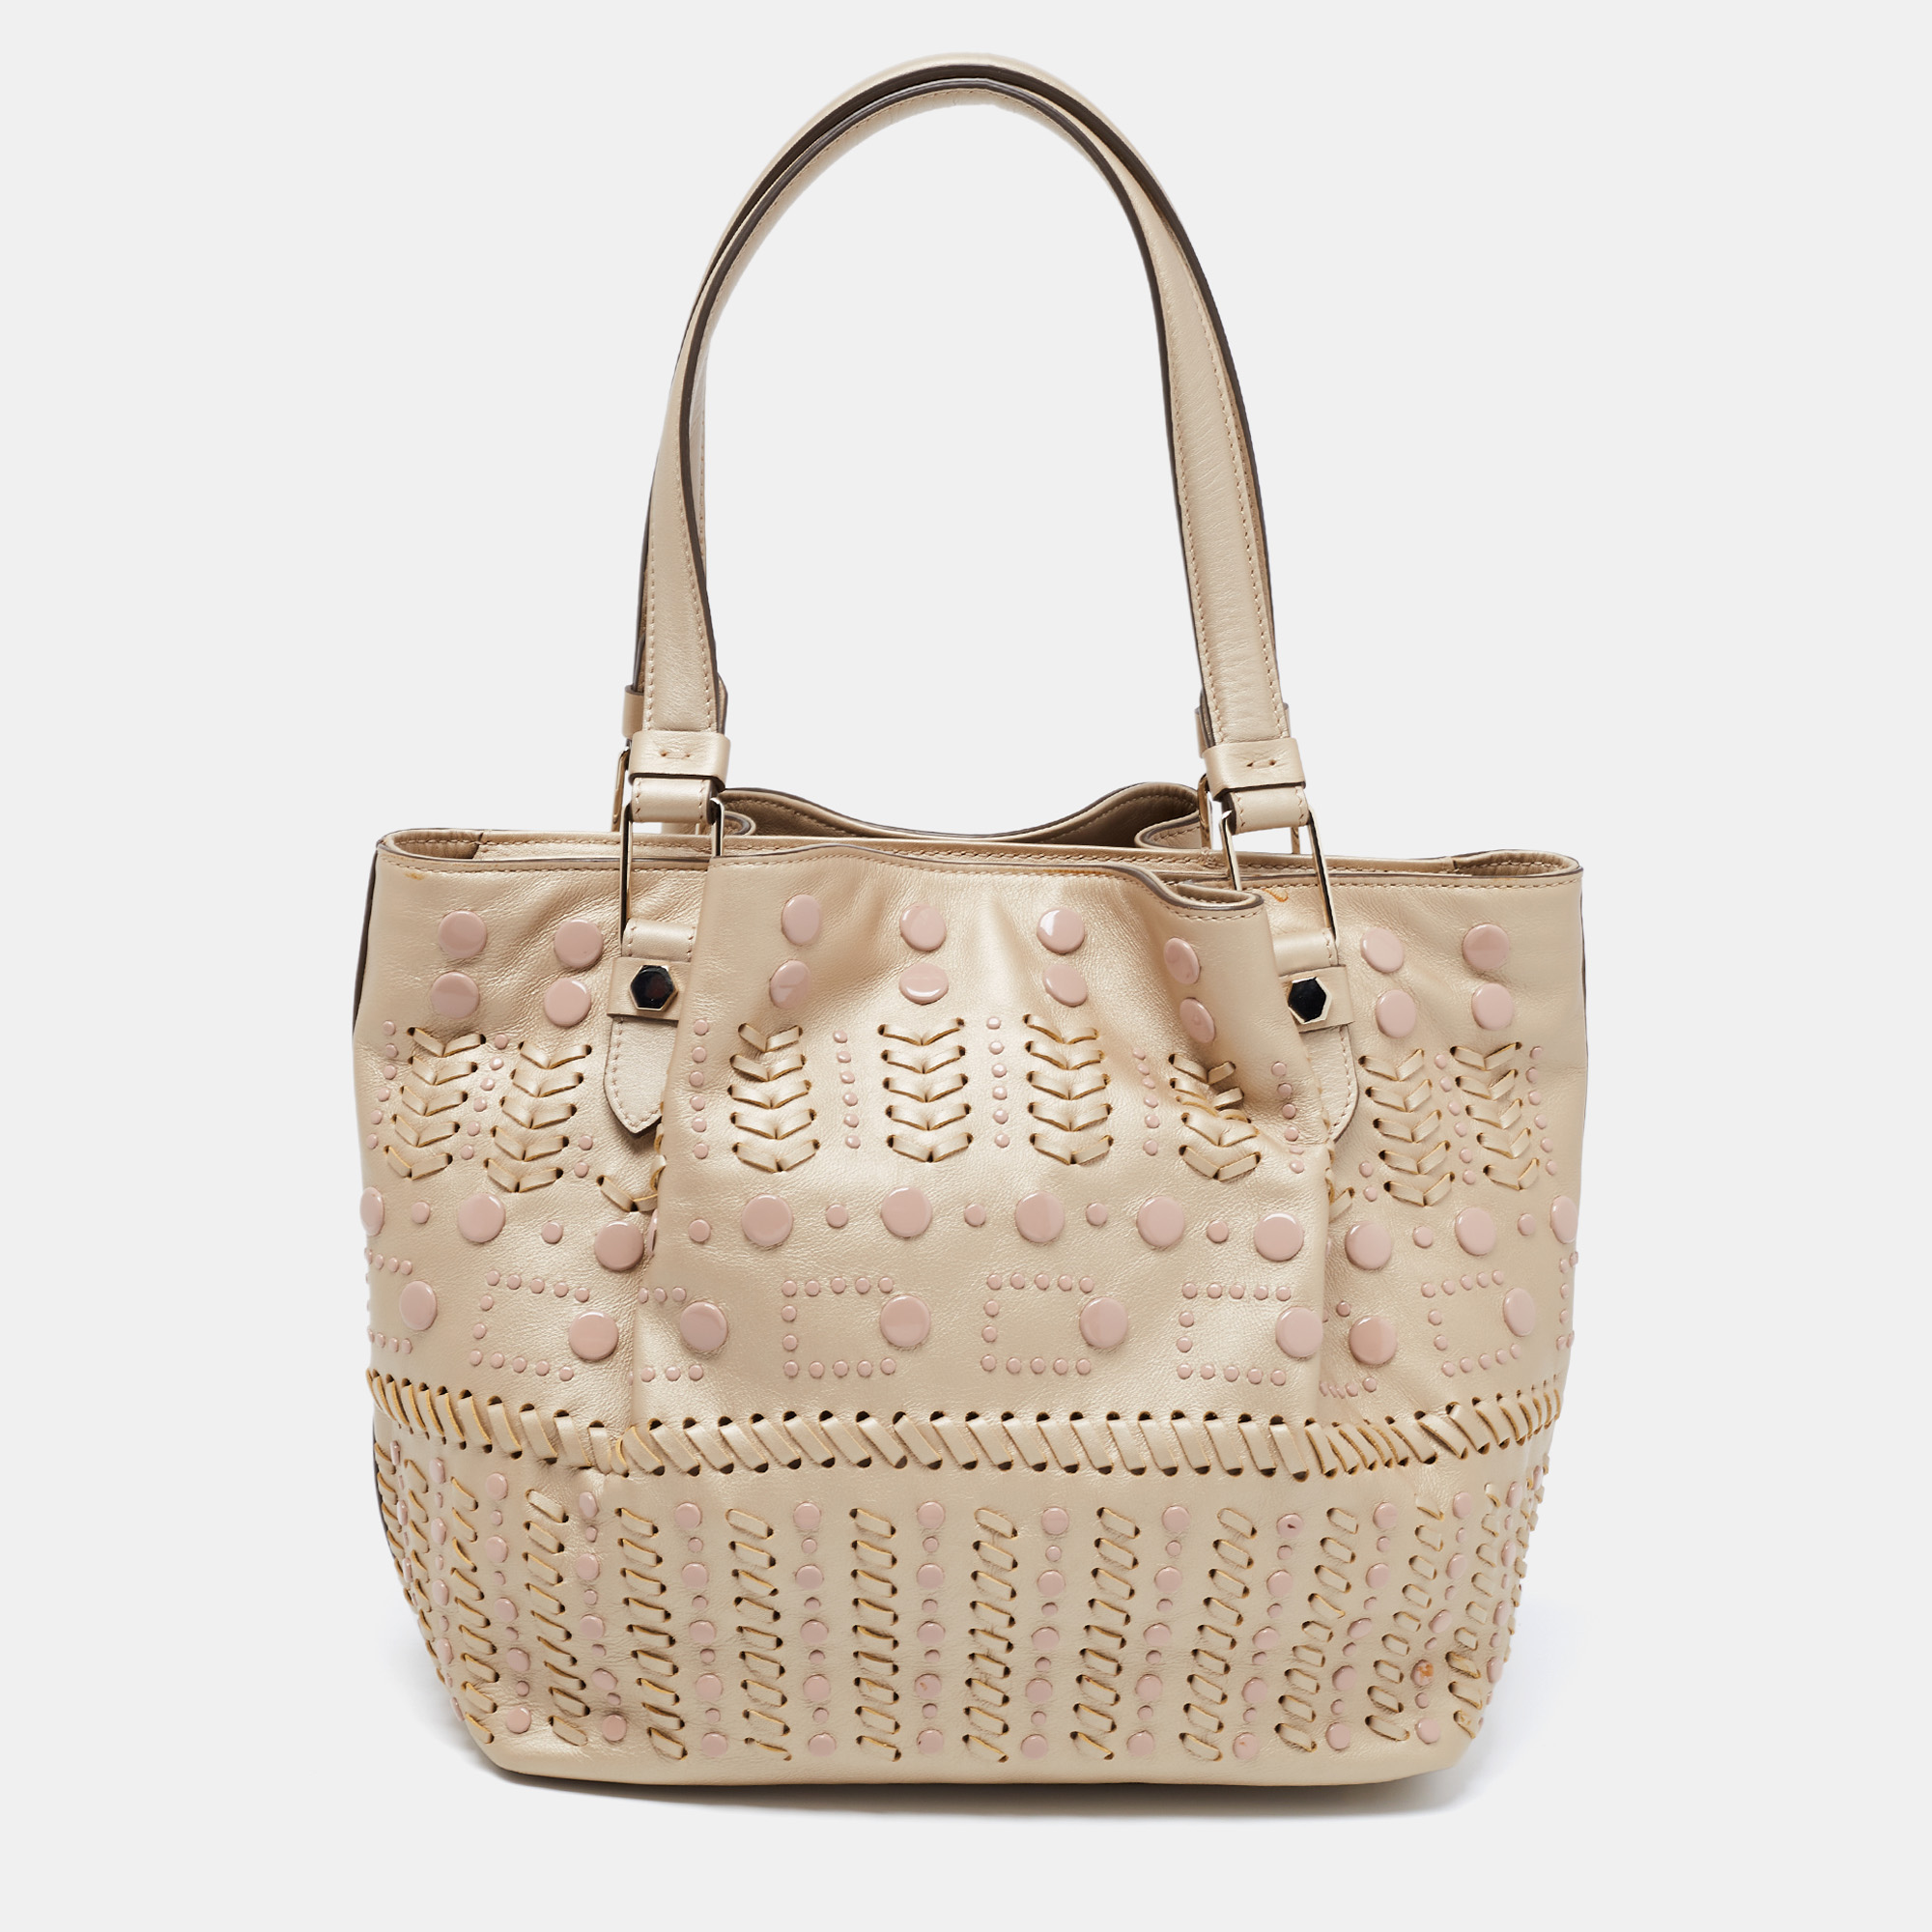 Tod's Metallic Beige Leather Small Studded Flower Tote